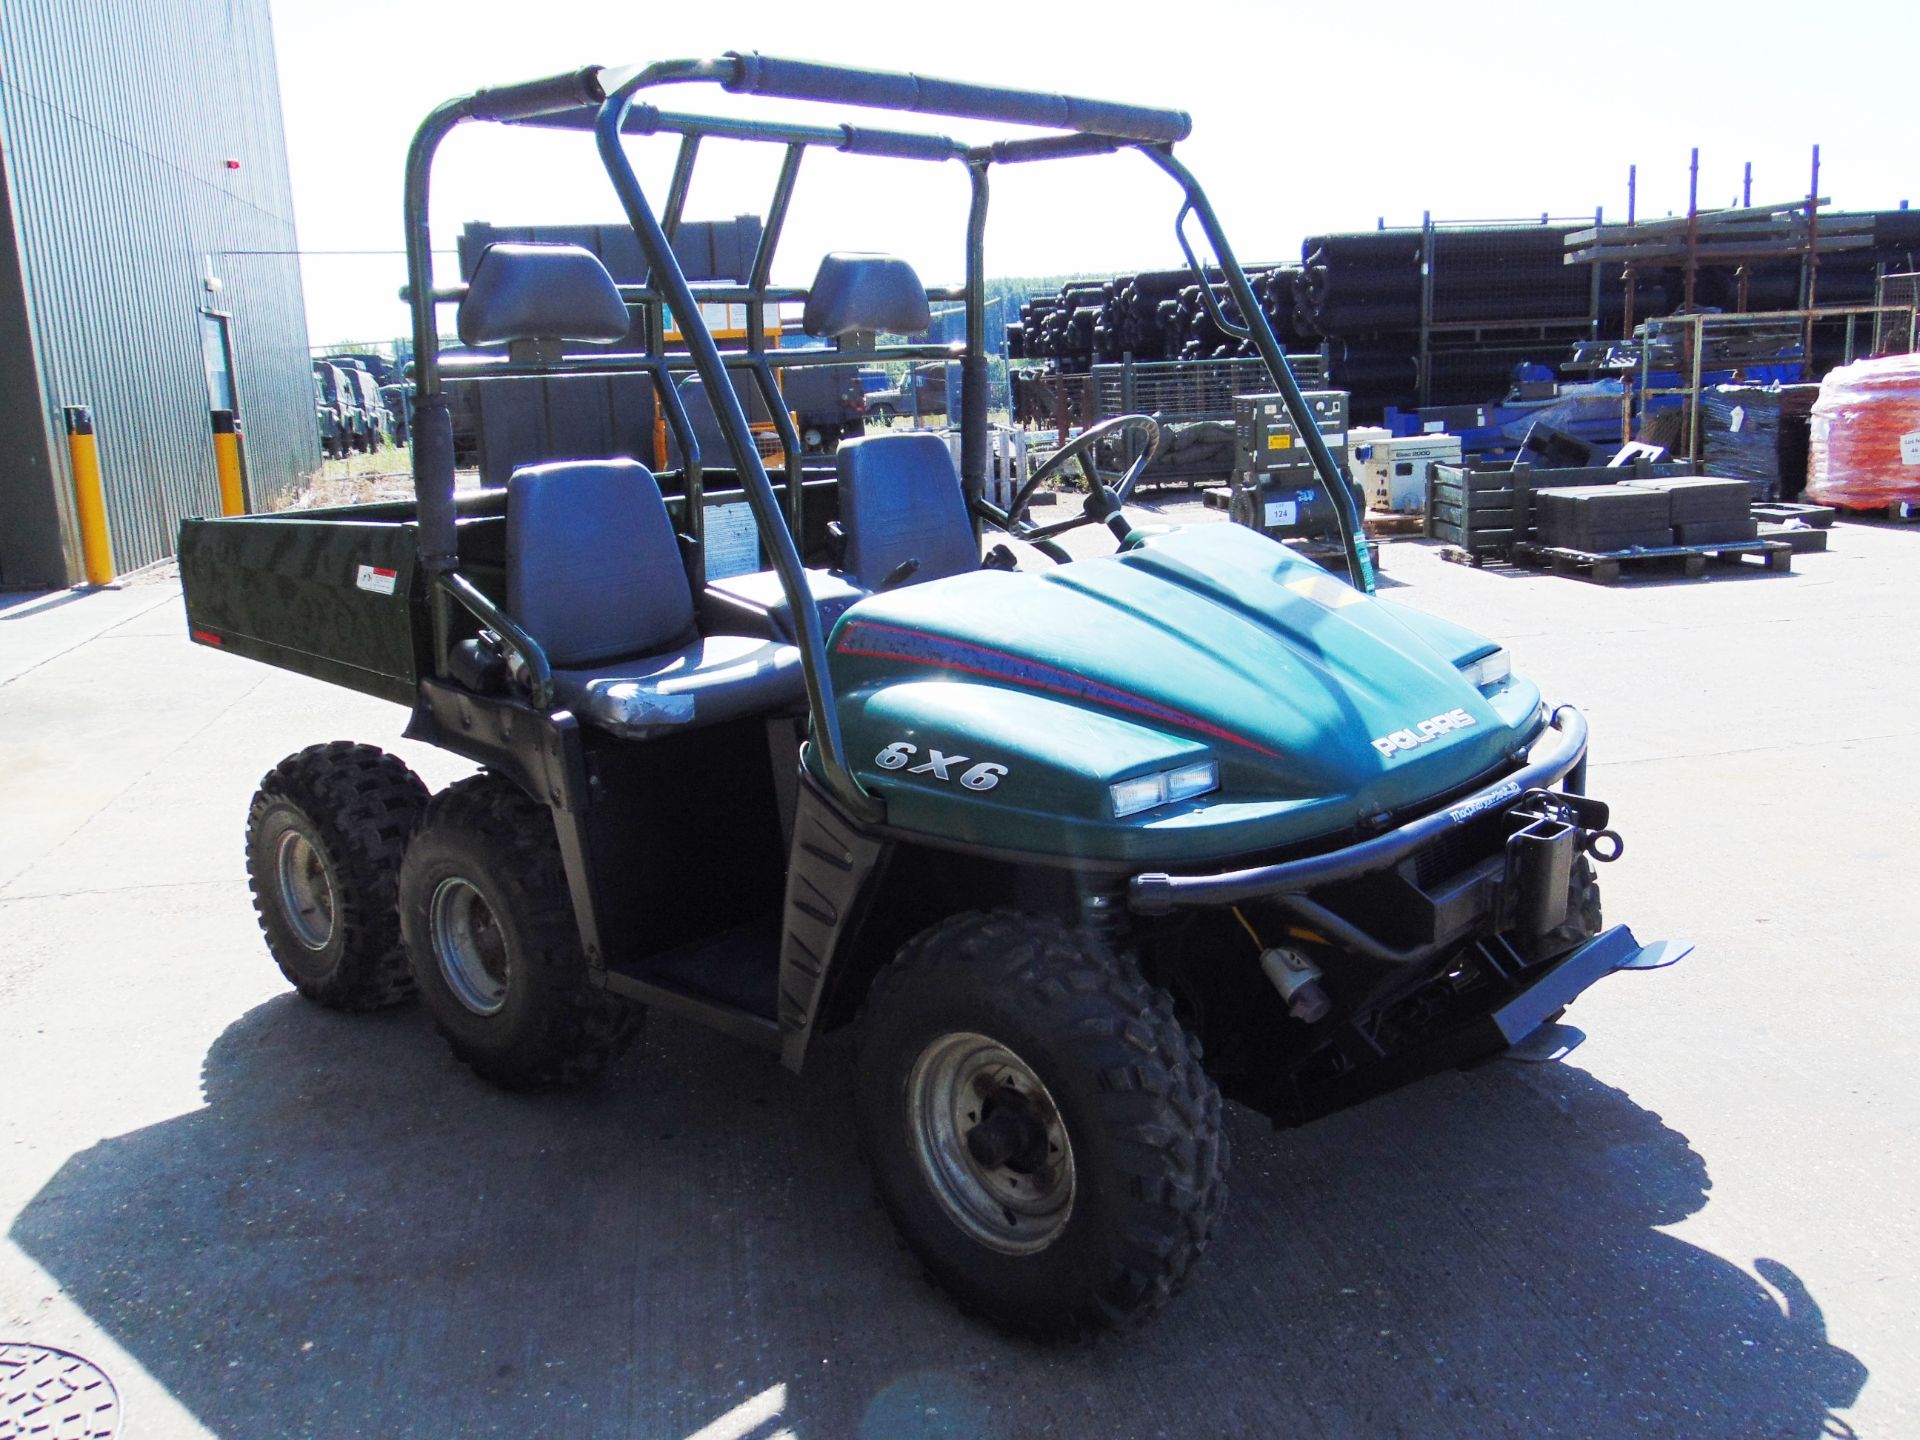 Polaris 6x6 Ranger Utility Vehicle Only 226 Hours! From National Grid. - Image 4 of 27